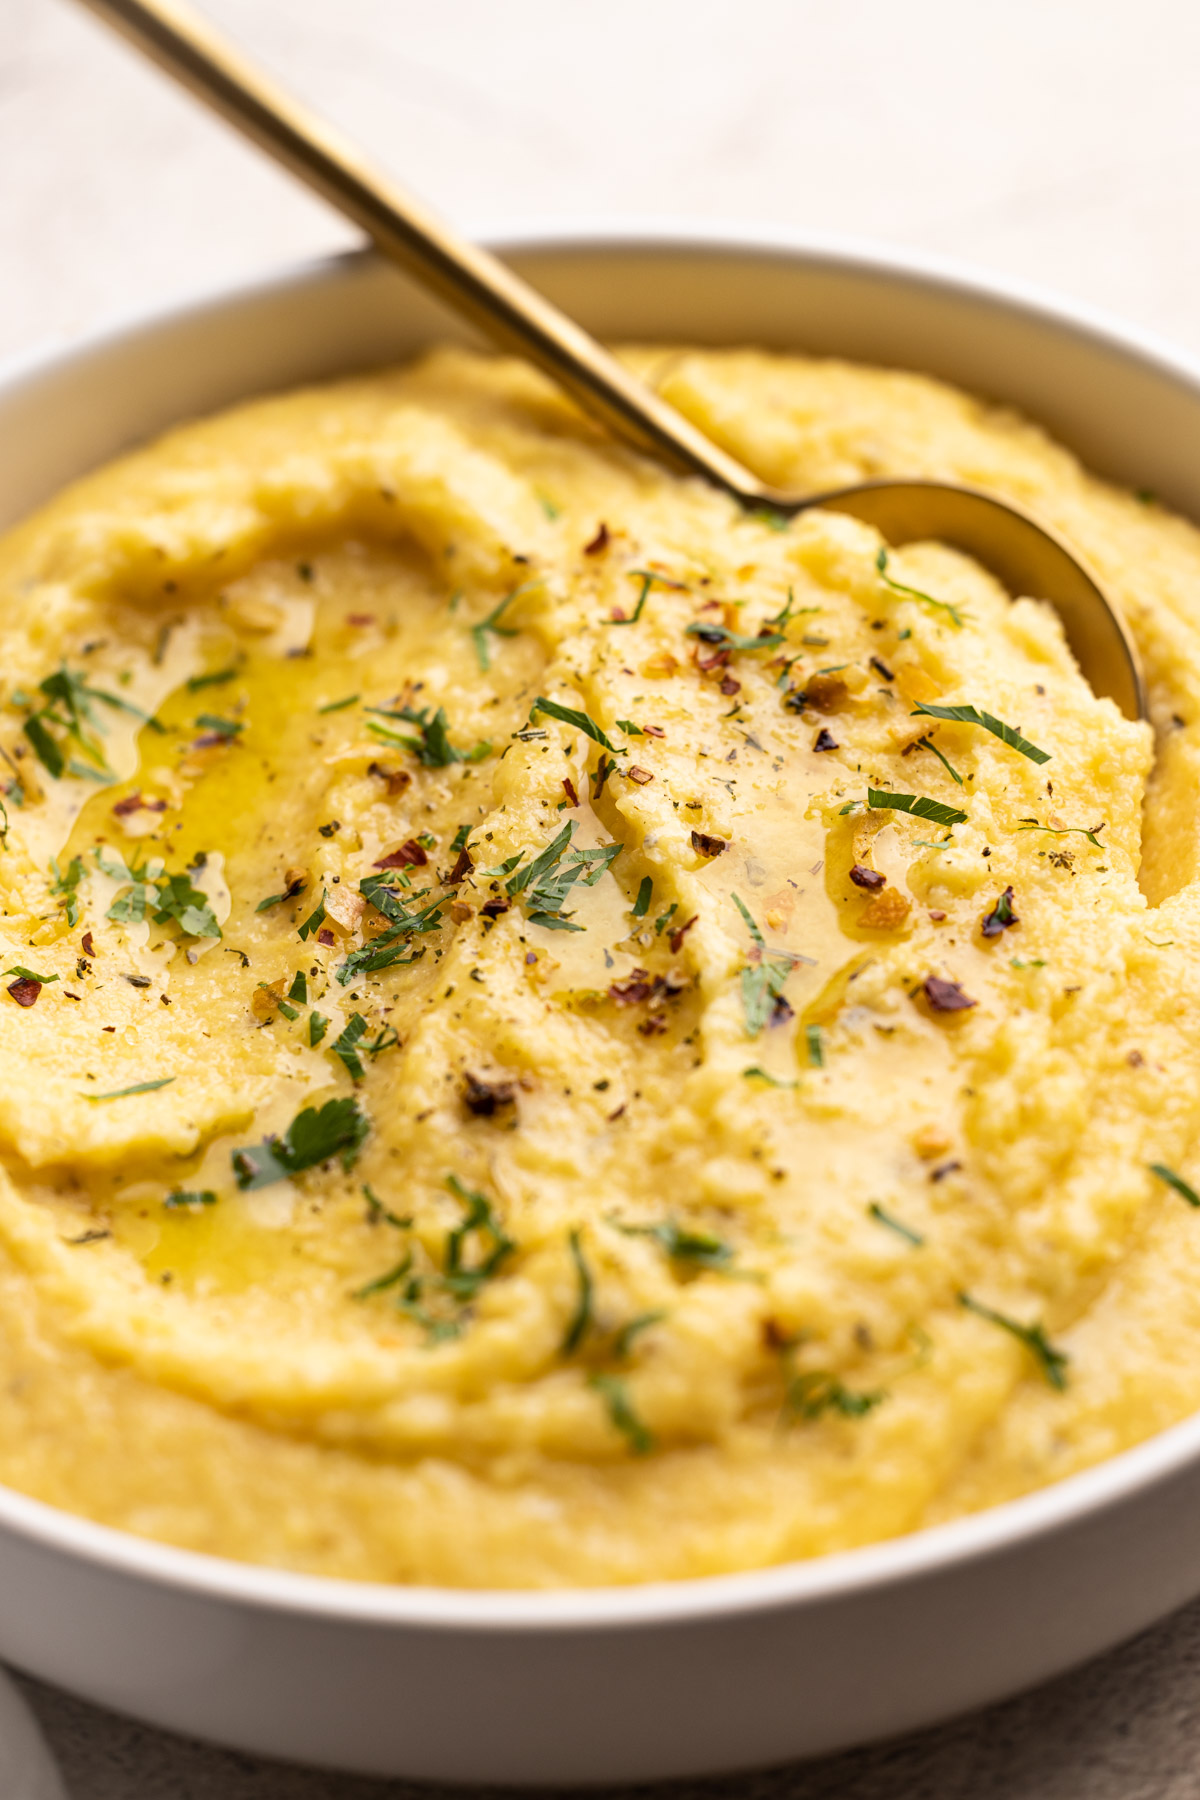 A bowl of creamy polenta with herbs and spices on top.